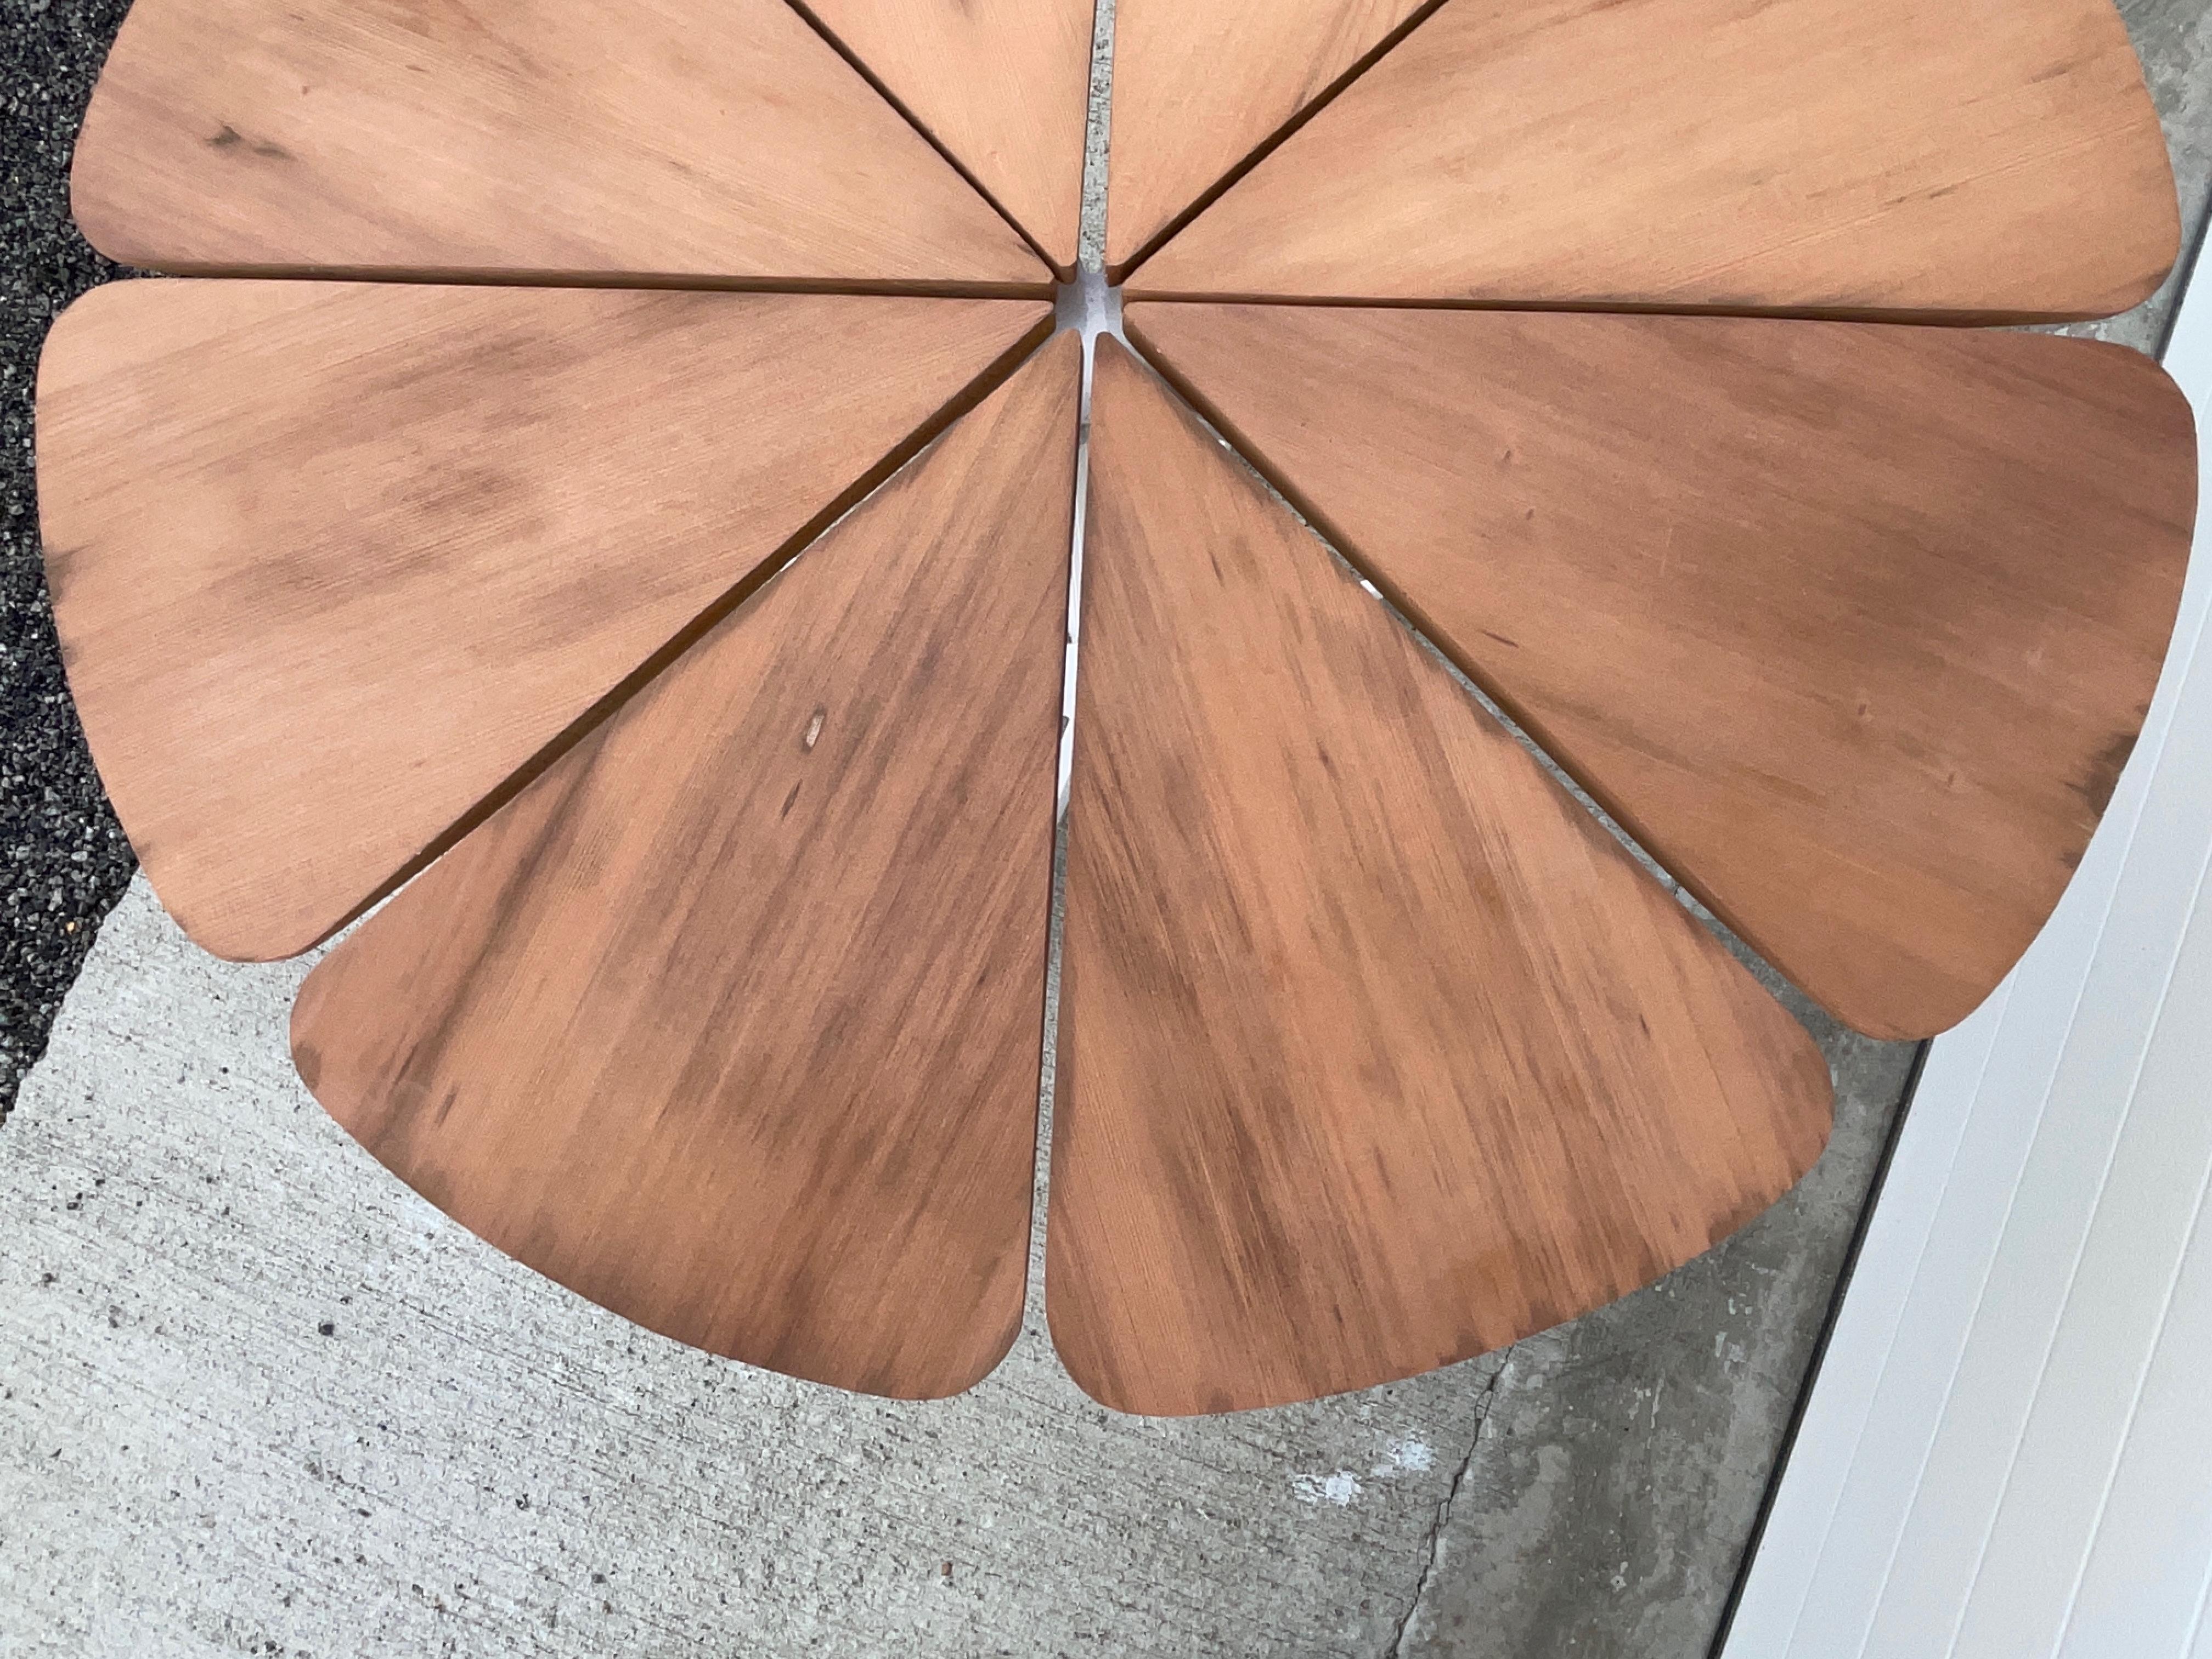 1961 Petal Dining Table by Richard Schultz for Knoll in California Redwood In Good Condition For Sale In Hanover, MA